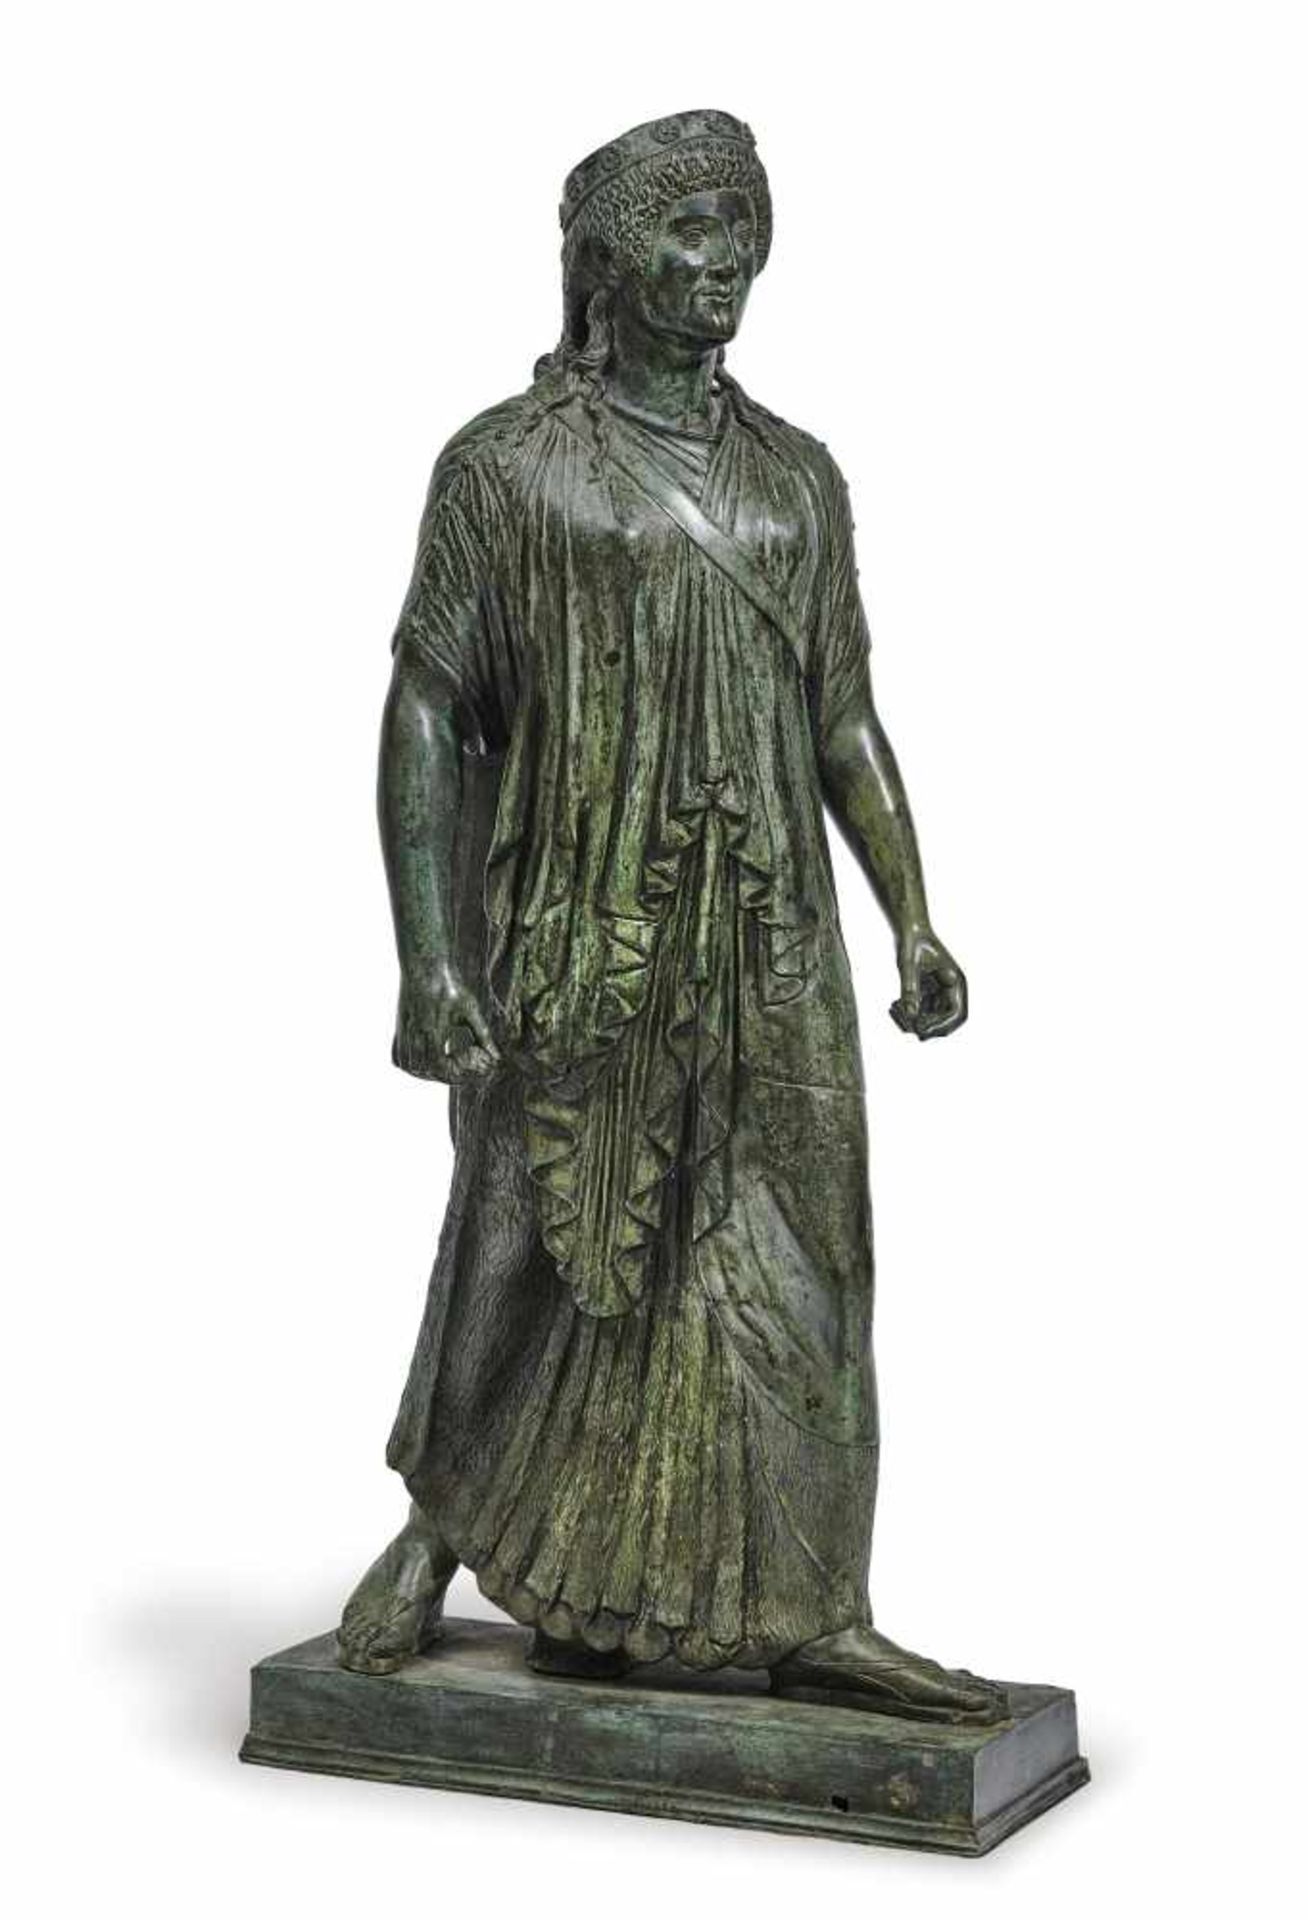 ArtemisItaly, in antique style, 19th century Bronze, patinated. Minor damage. Height 115 cm.